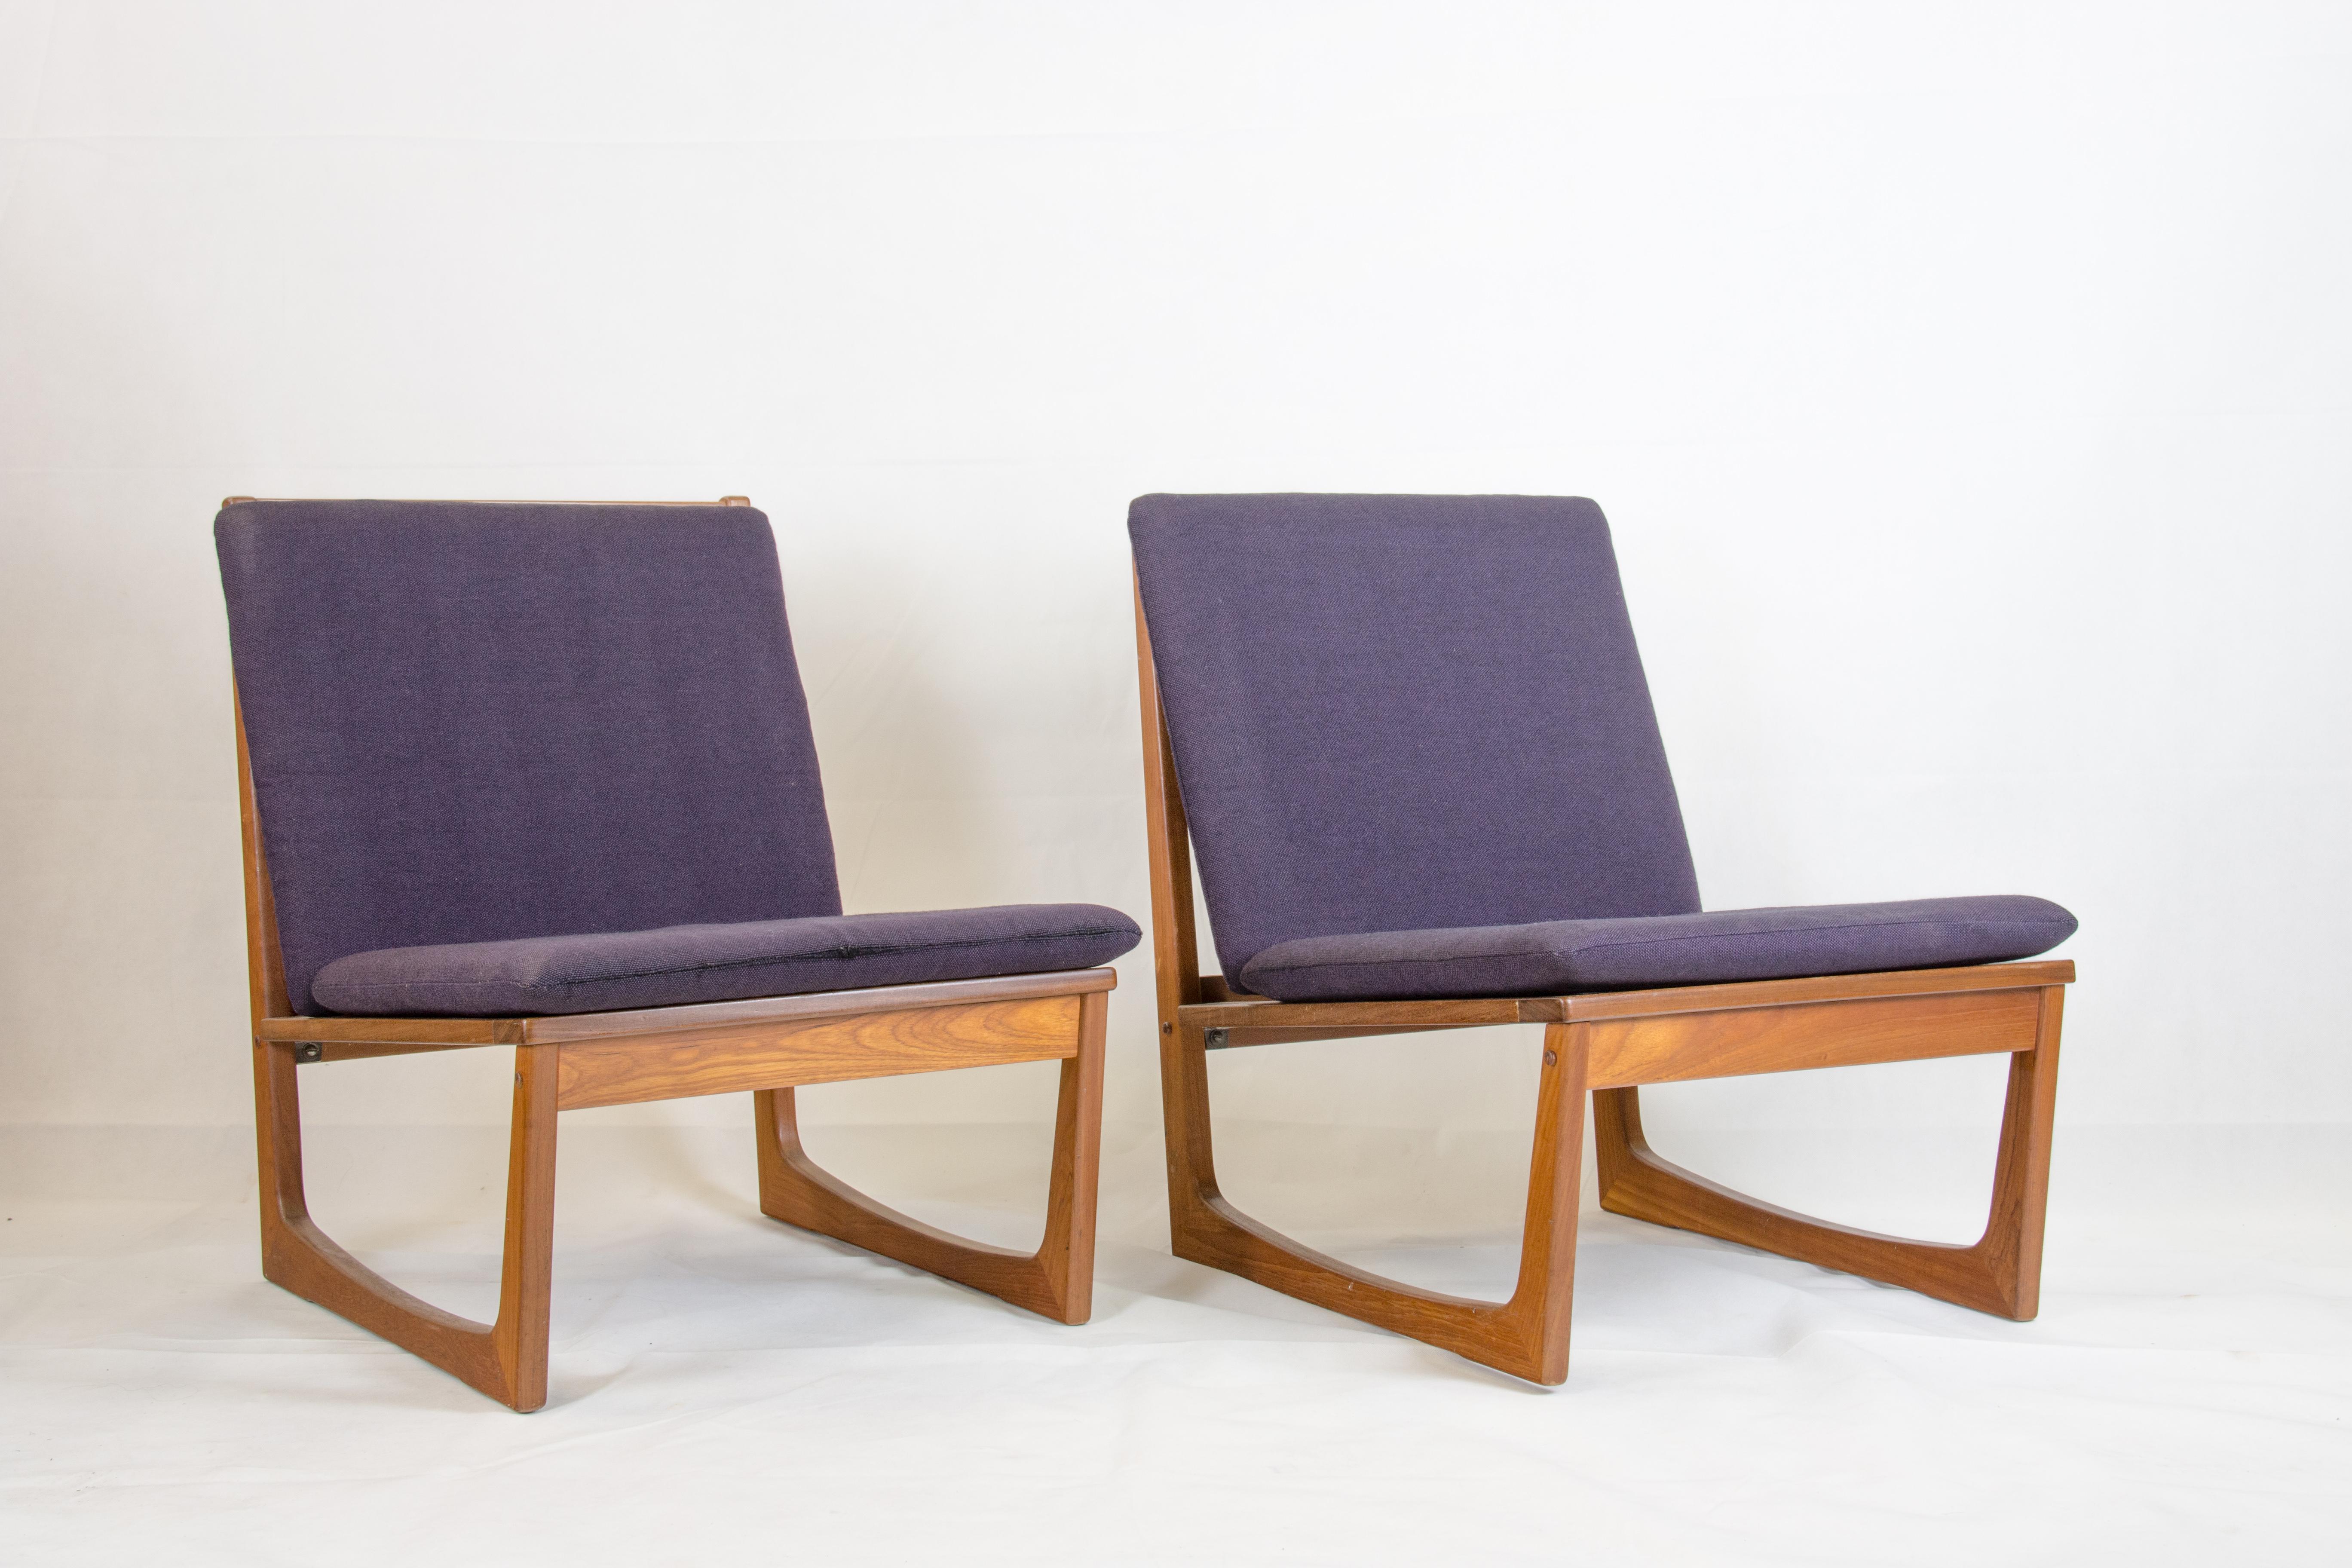 Pair of teak easy chairs designed by Hans Olsen
and manufactured by Brdr. Juul Kristensen
original purple wool cushions probably by Kvadrat